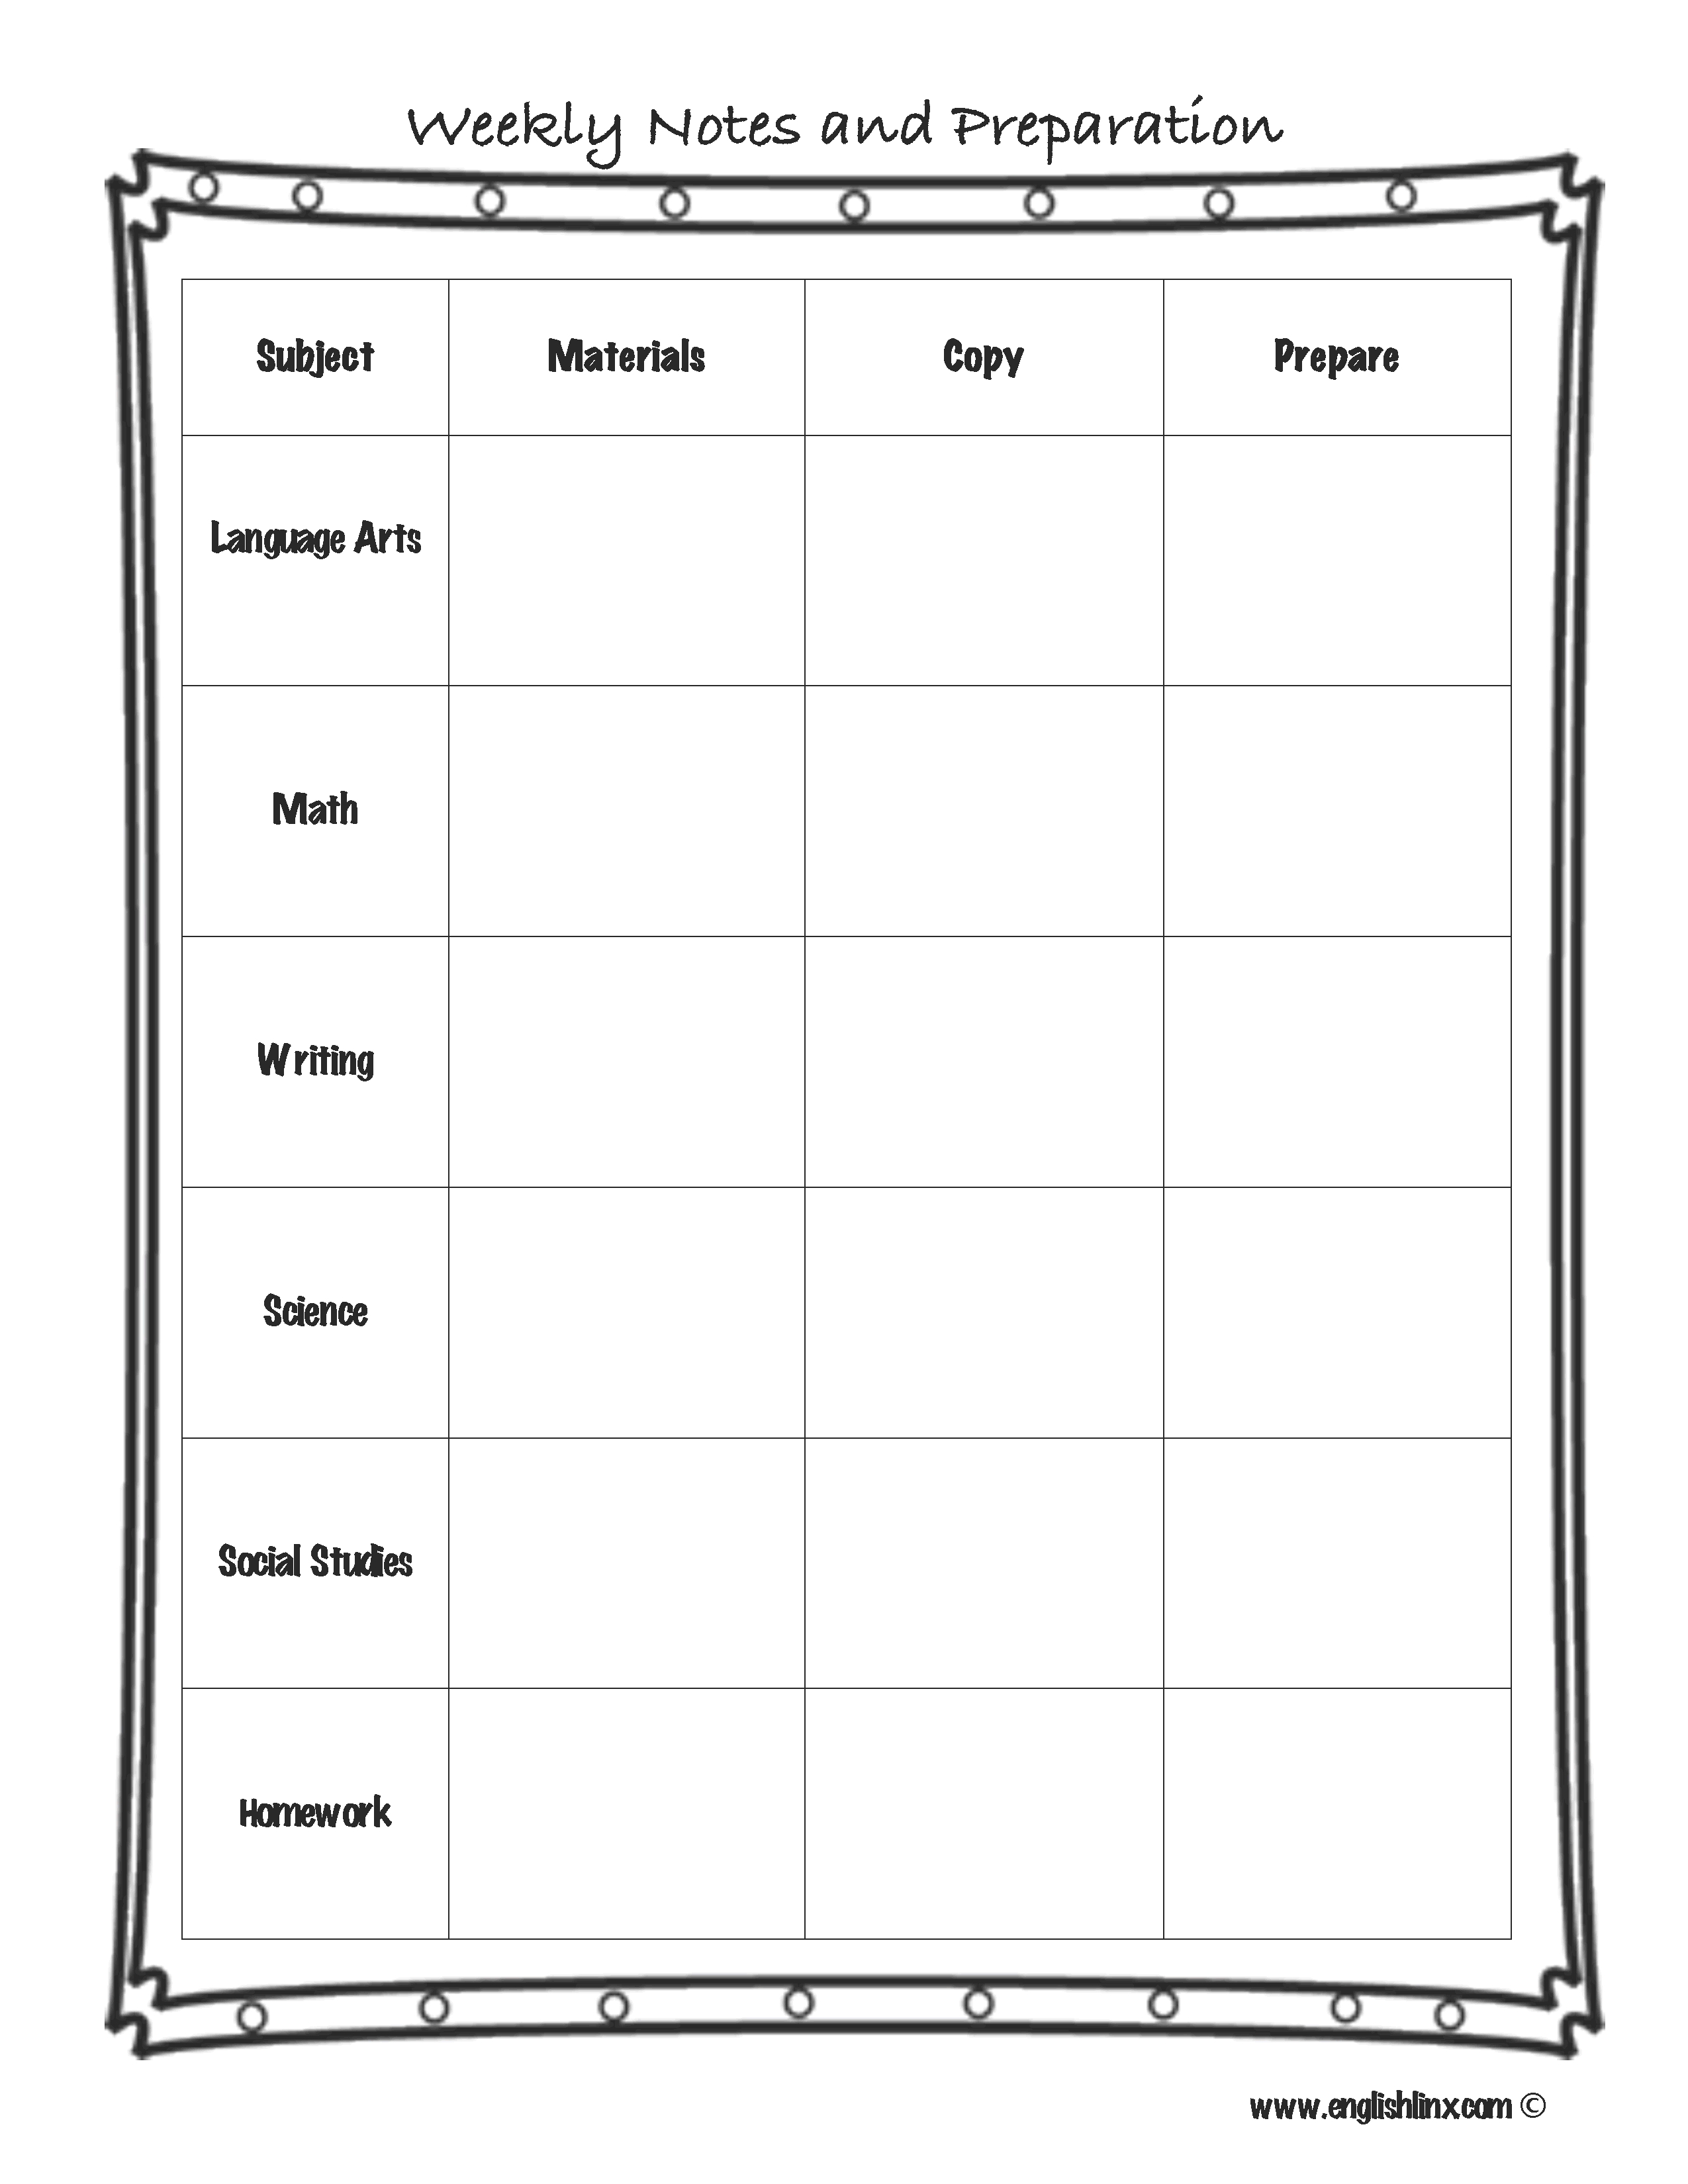 025 Plan Templates Weekly Notes Preparation Lesson Template-Weekly Lesson Plan Blank Template